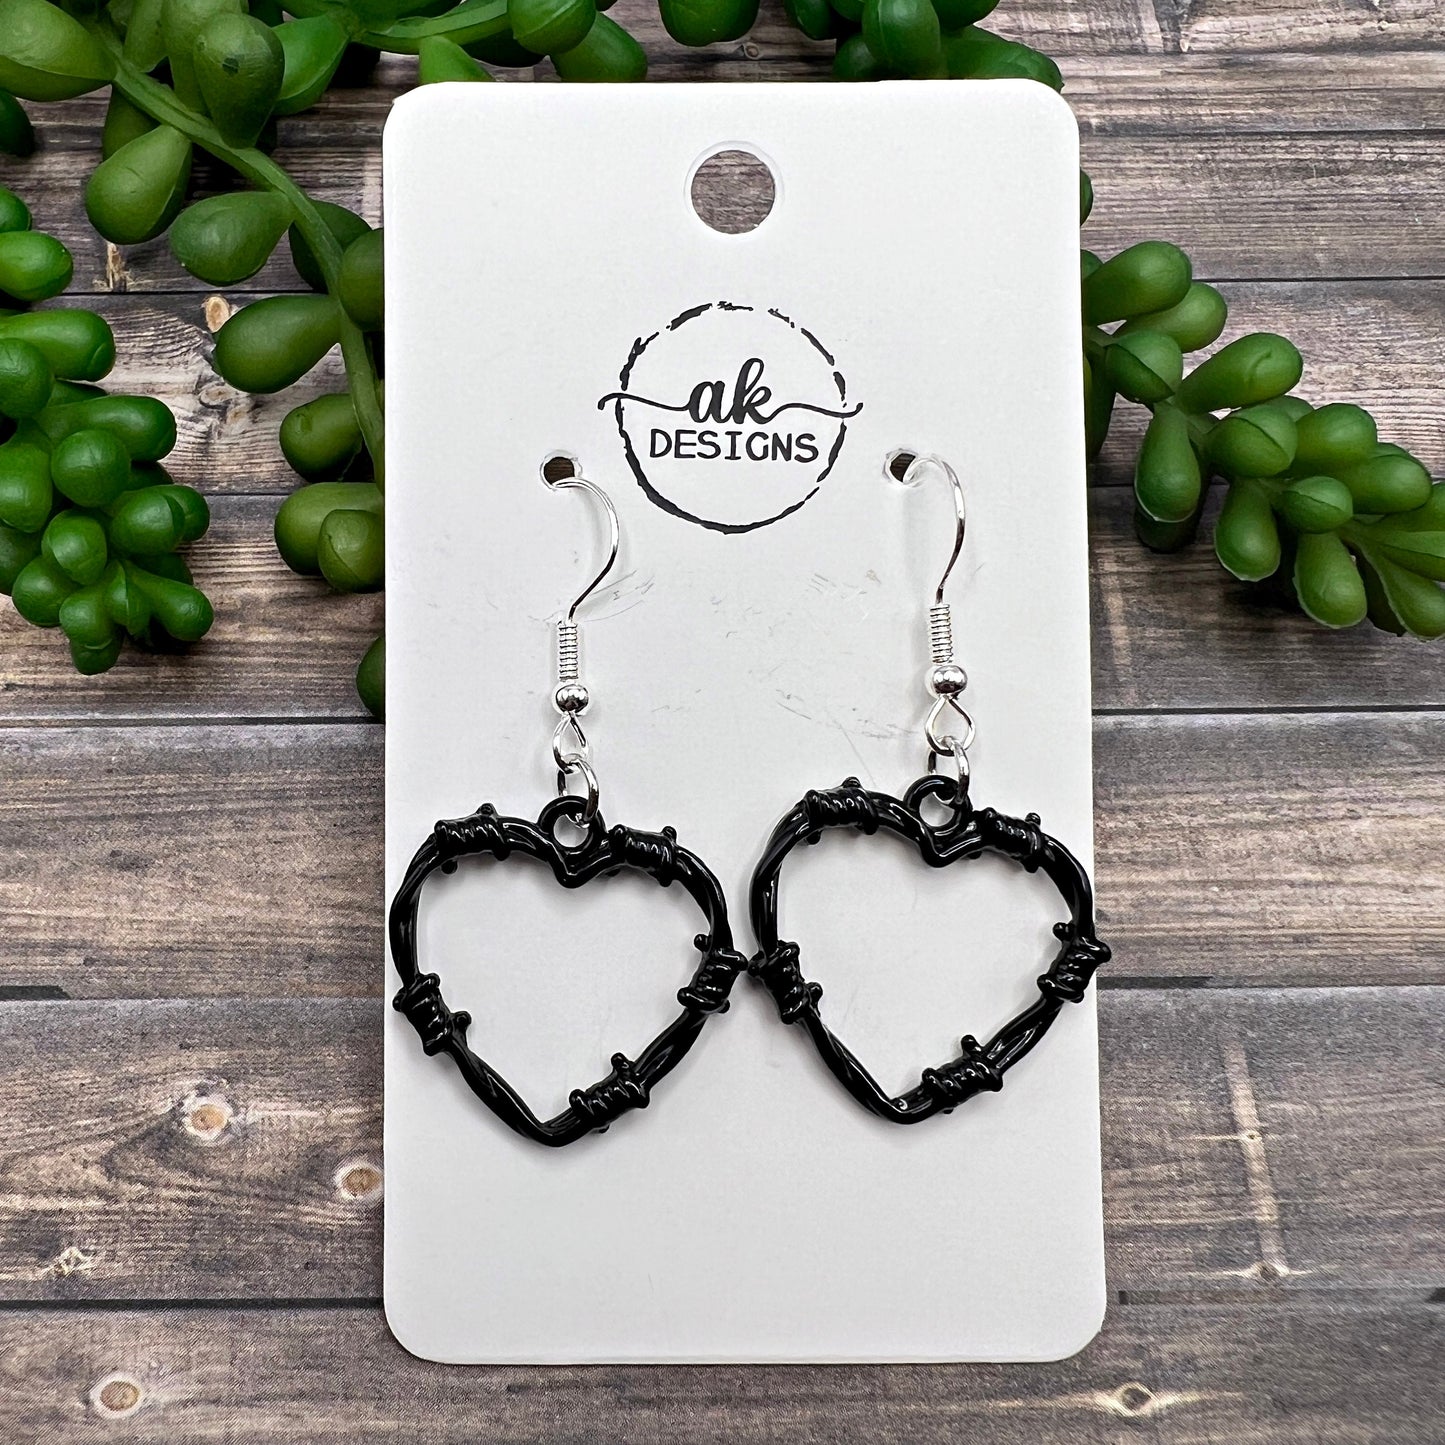 Painted Barbed Wire Heart Earrings